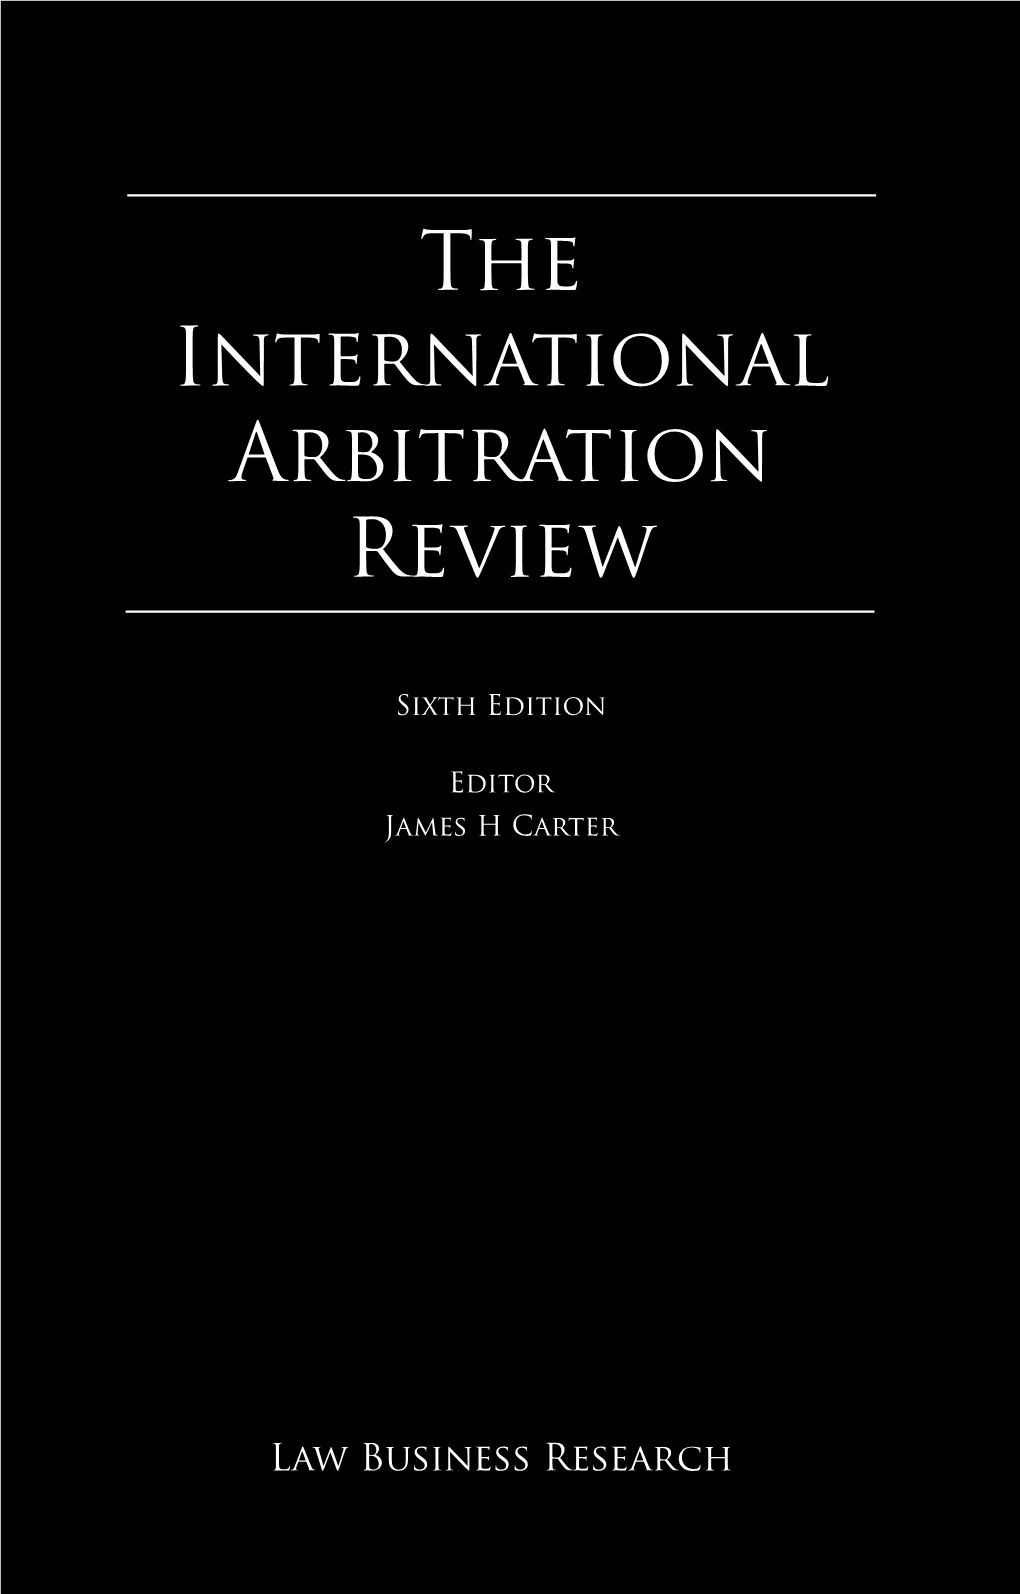 The International Arbitration Review